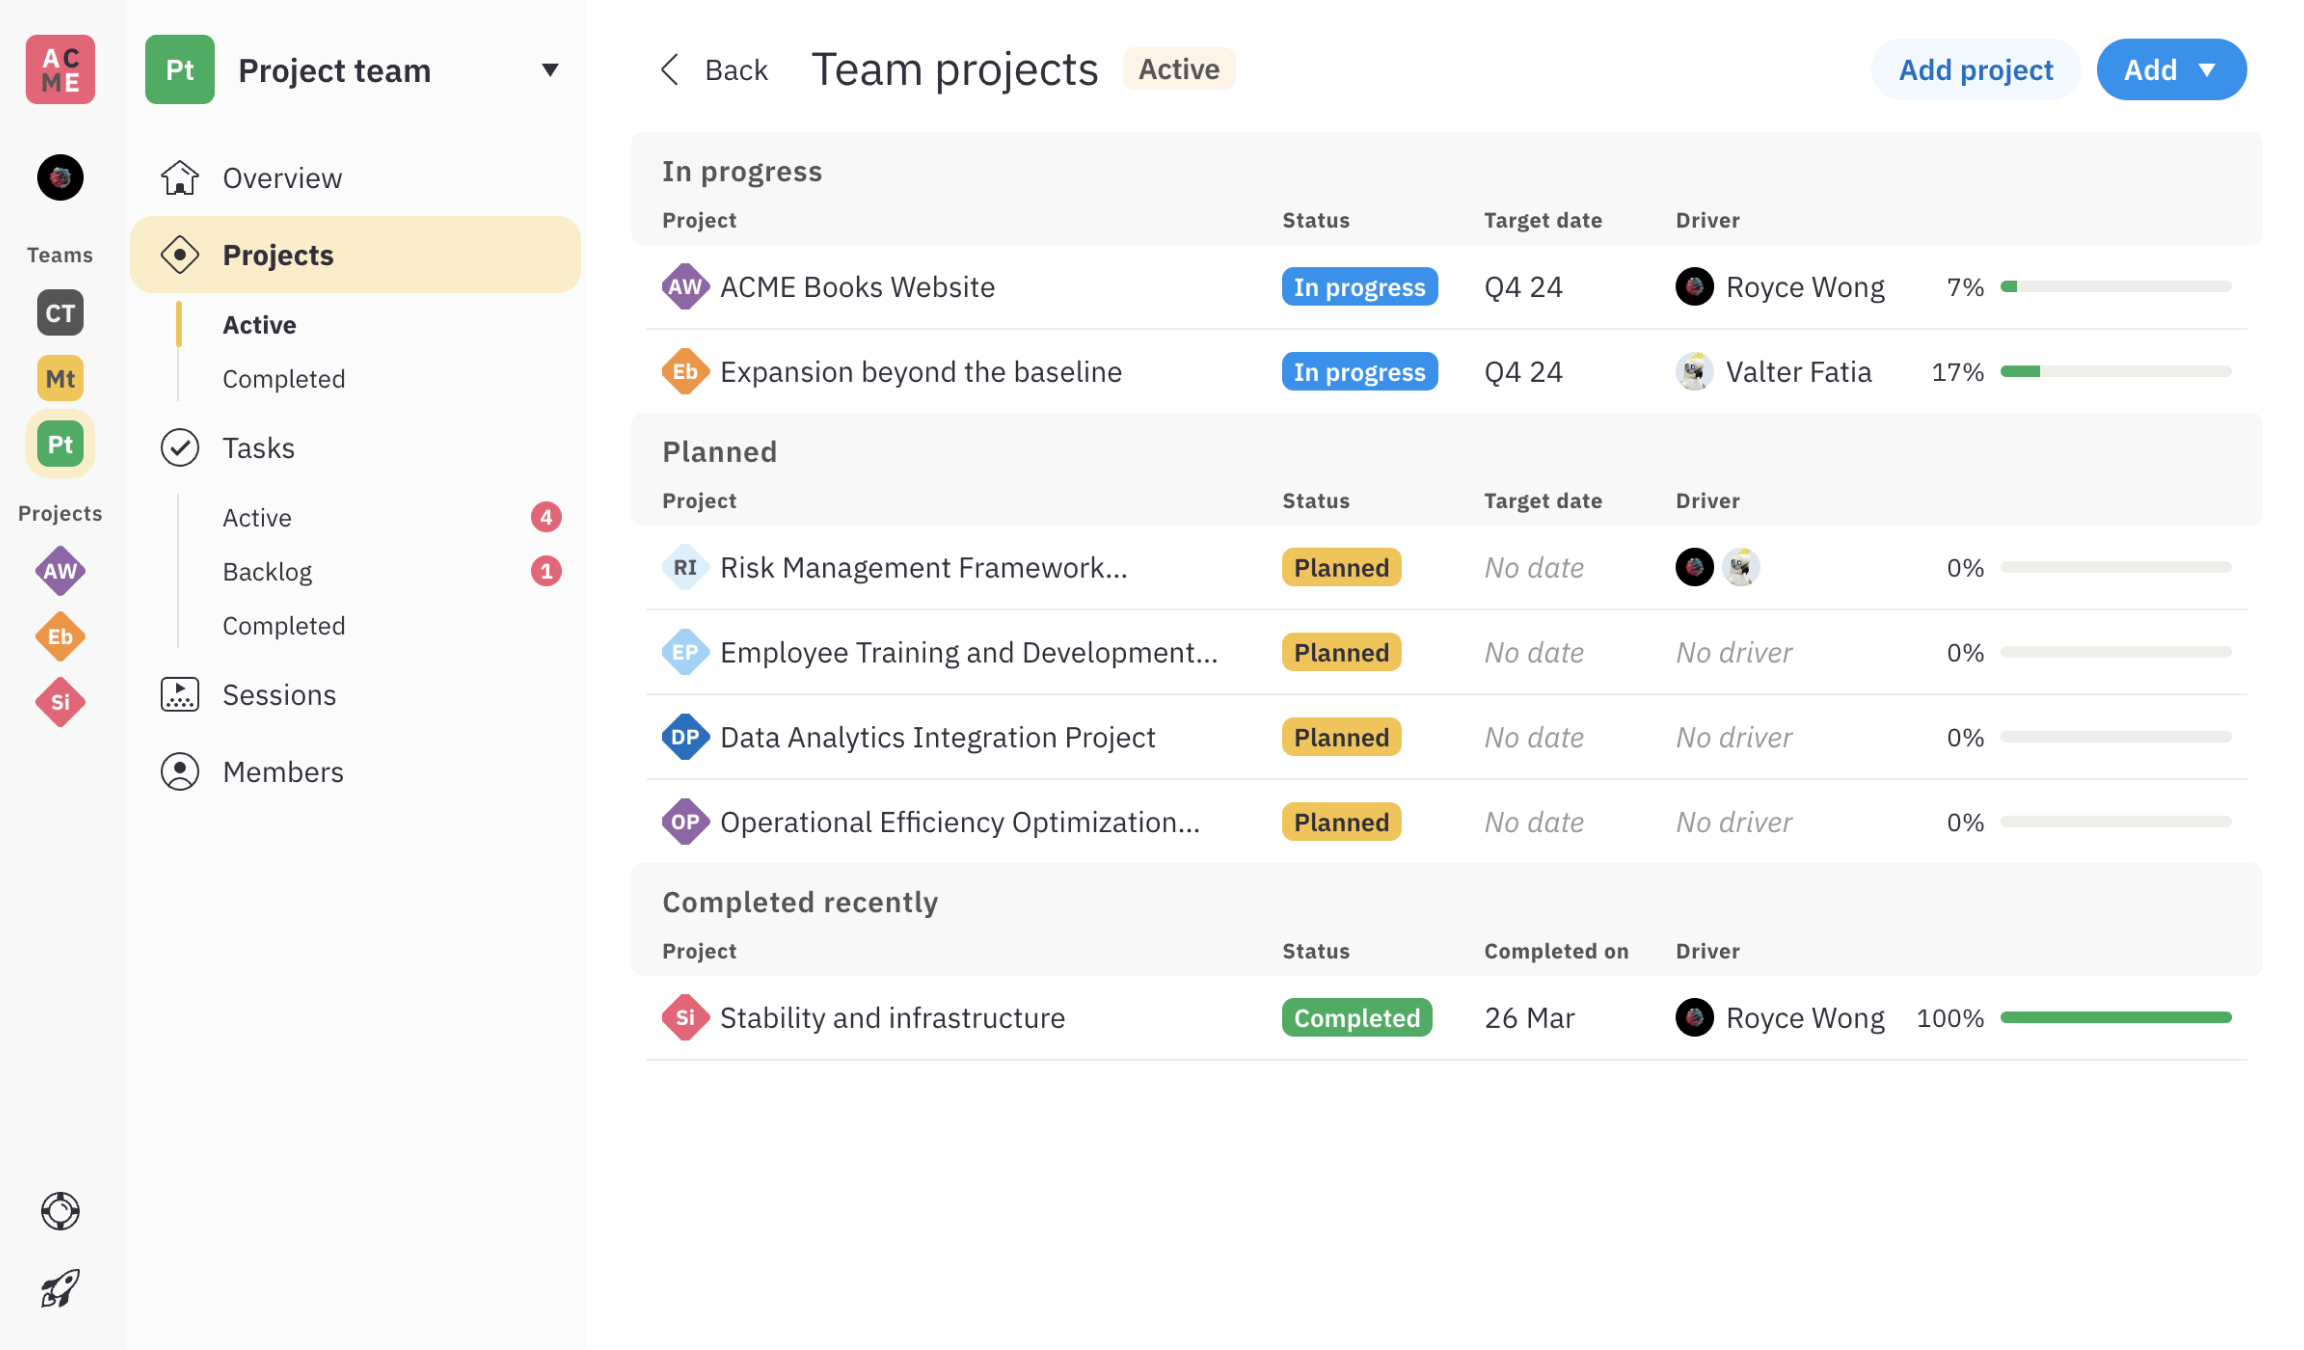 Team projects overview